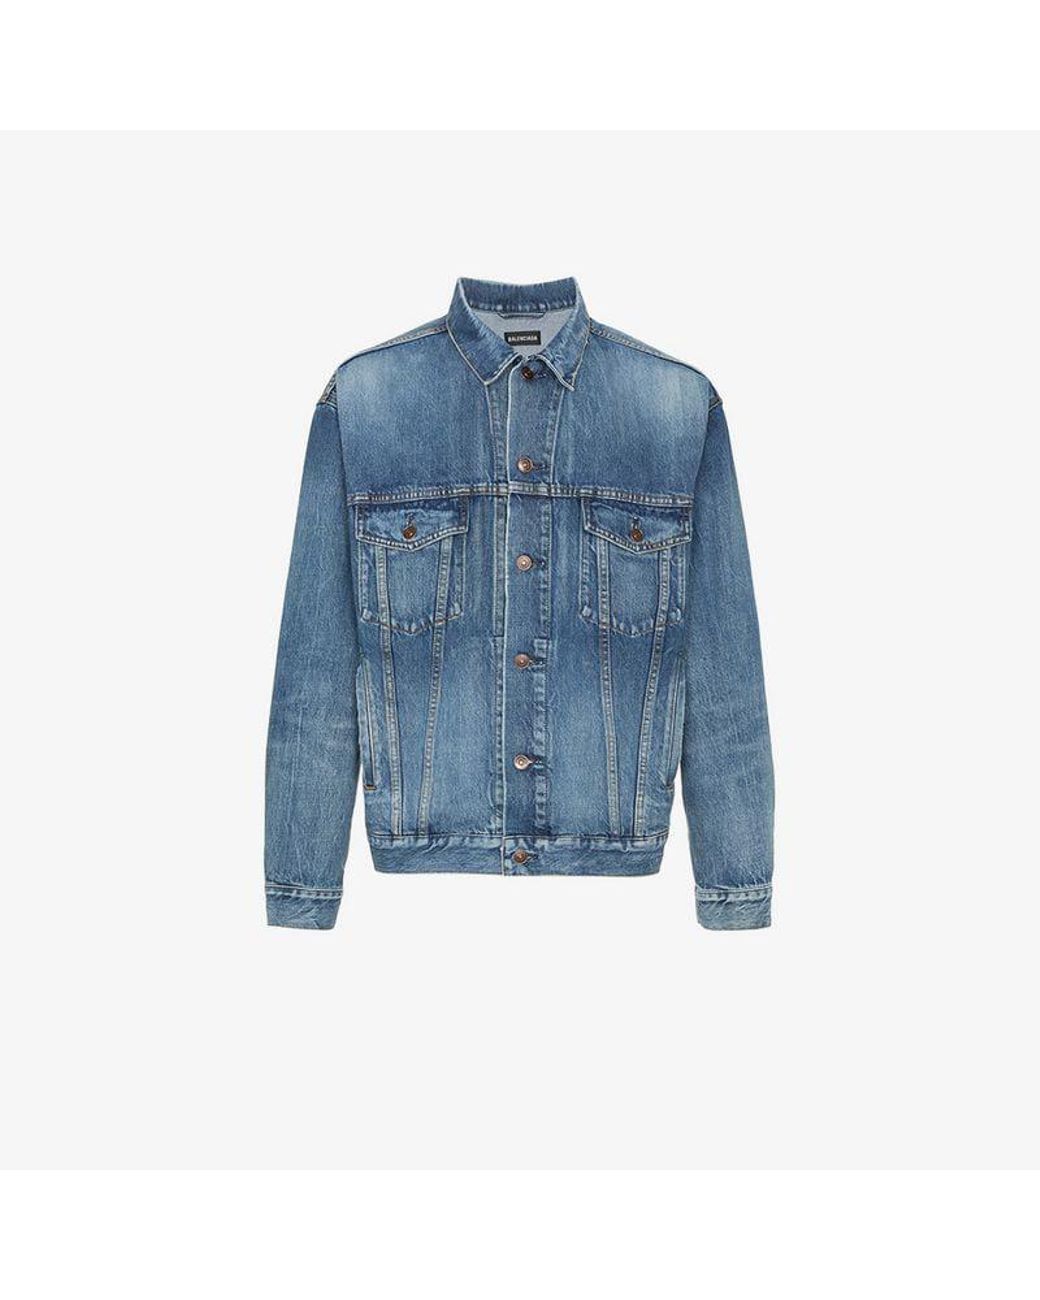 Balenciaga Embroidered Bb Mode Denim Jacket in Blue for Men | Lyst